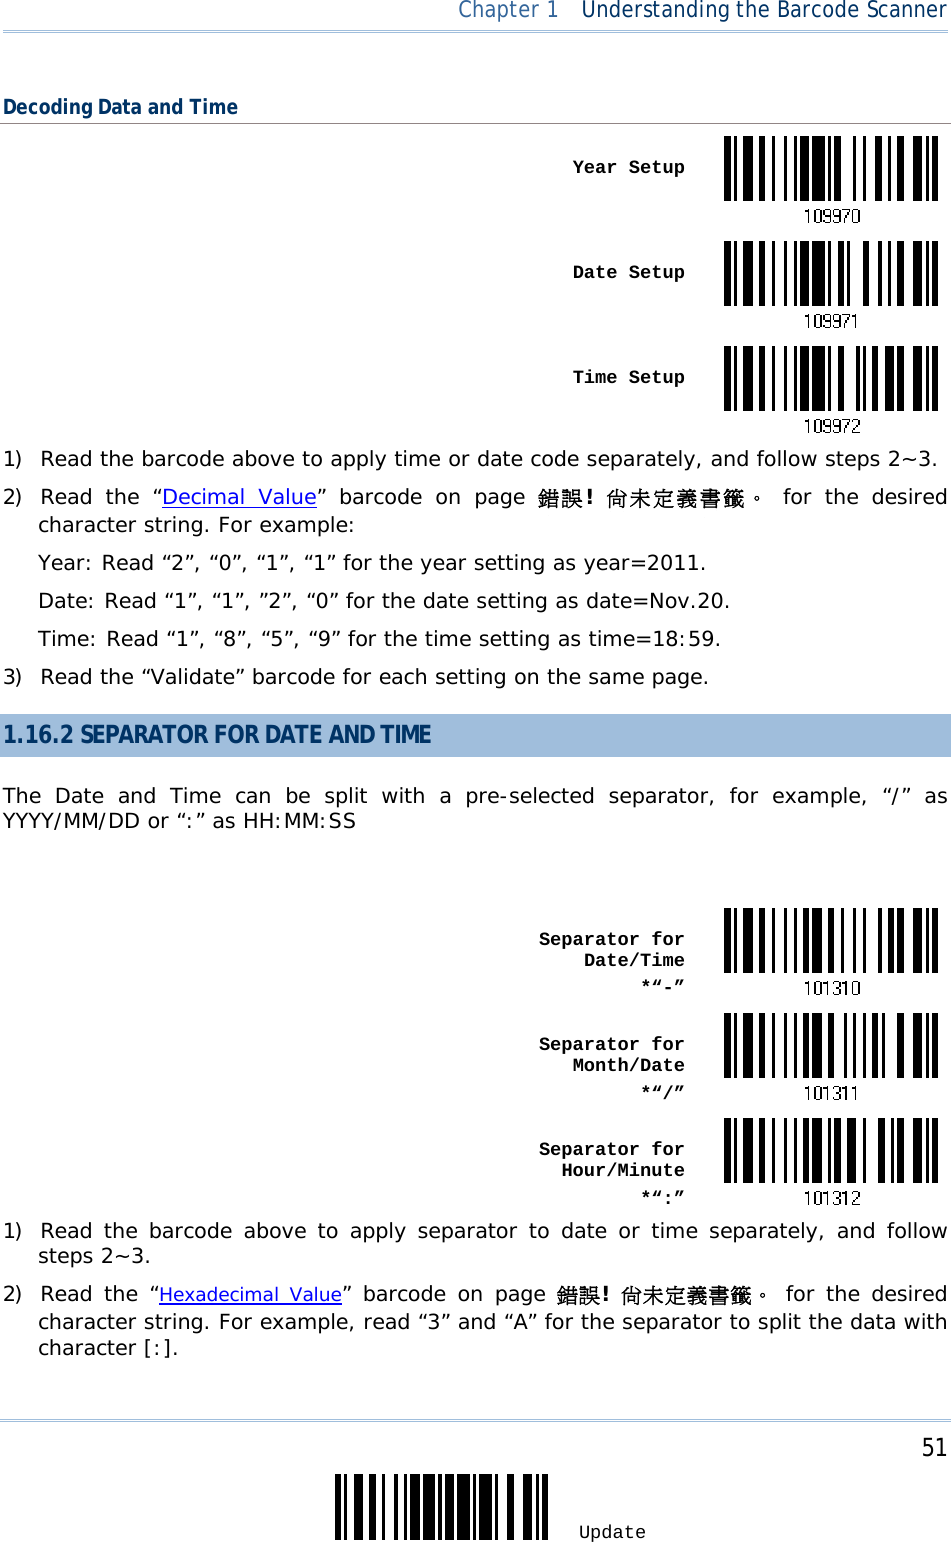     51 Update  Chapter 1  Understanding the Barcode Scanner Decoding Data and Time  Year Setup Date Setup Time Setup1) Read the barcode above to apply time or date code separately, and follow steps 2~3.  2) Read the “Decimal Value” barcode on page 錯誤!  尚未定義書籤。 for the desired character string. For example: Year: Read “2”, “0”, “1”, “1” for the year setting as year=2011.  Date: Read “1”, “1”, ”2”, “0” for the date setting as date=Nov.20. Time: Read “1”, “8”, “5”, “9” for the time setting as time=18:59. 3) Read the “Validate” barcode for each setting on the same page. 1.16.2 SEPARATOR FOR DATE AND TIME The Date and Time can be split with a pre-selected separator, for example, “/” as YYYY/MM/DD or “:” as HH:MM:SS   Separator for Date/Time*“-” Separator for Month/Date*“/” Separator for Hour/Minute*“:”1) Read the barcode above to apply separator to date or time separately, and follow steps 2~3.  2) Read the “Hexadecimal Value” barcode on page 錯誤! 尚未定義書籤。 for the desired character string. For example, read “3” and “A” for the separator to split the data with character [:]. 